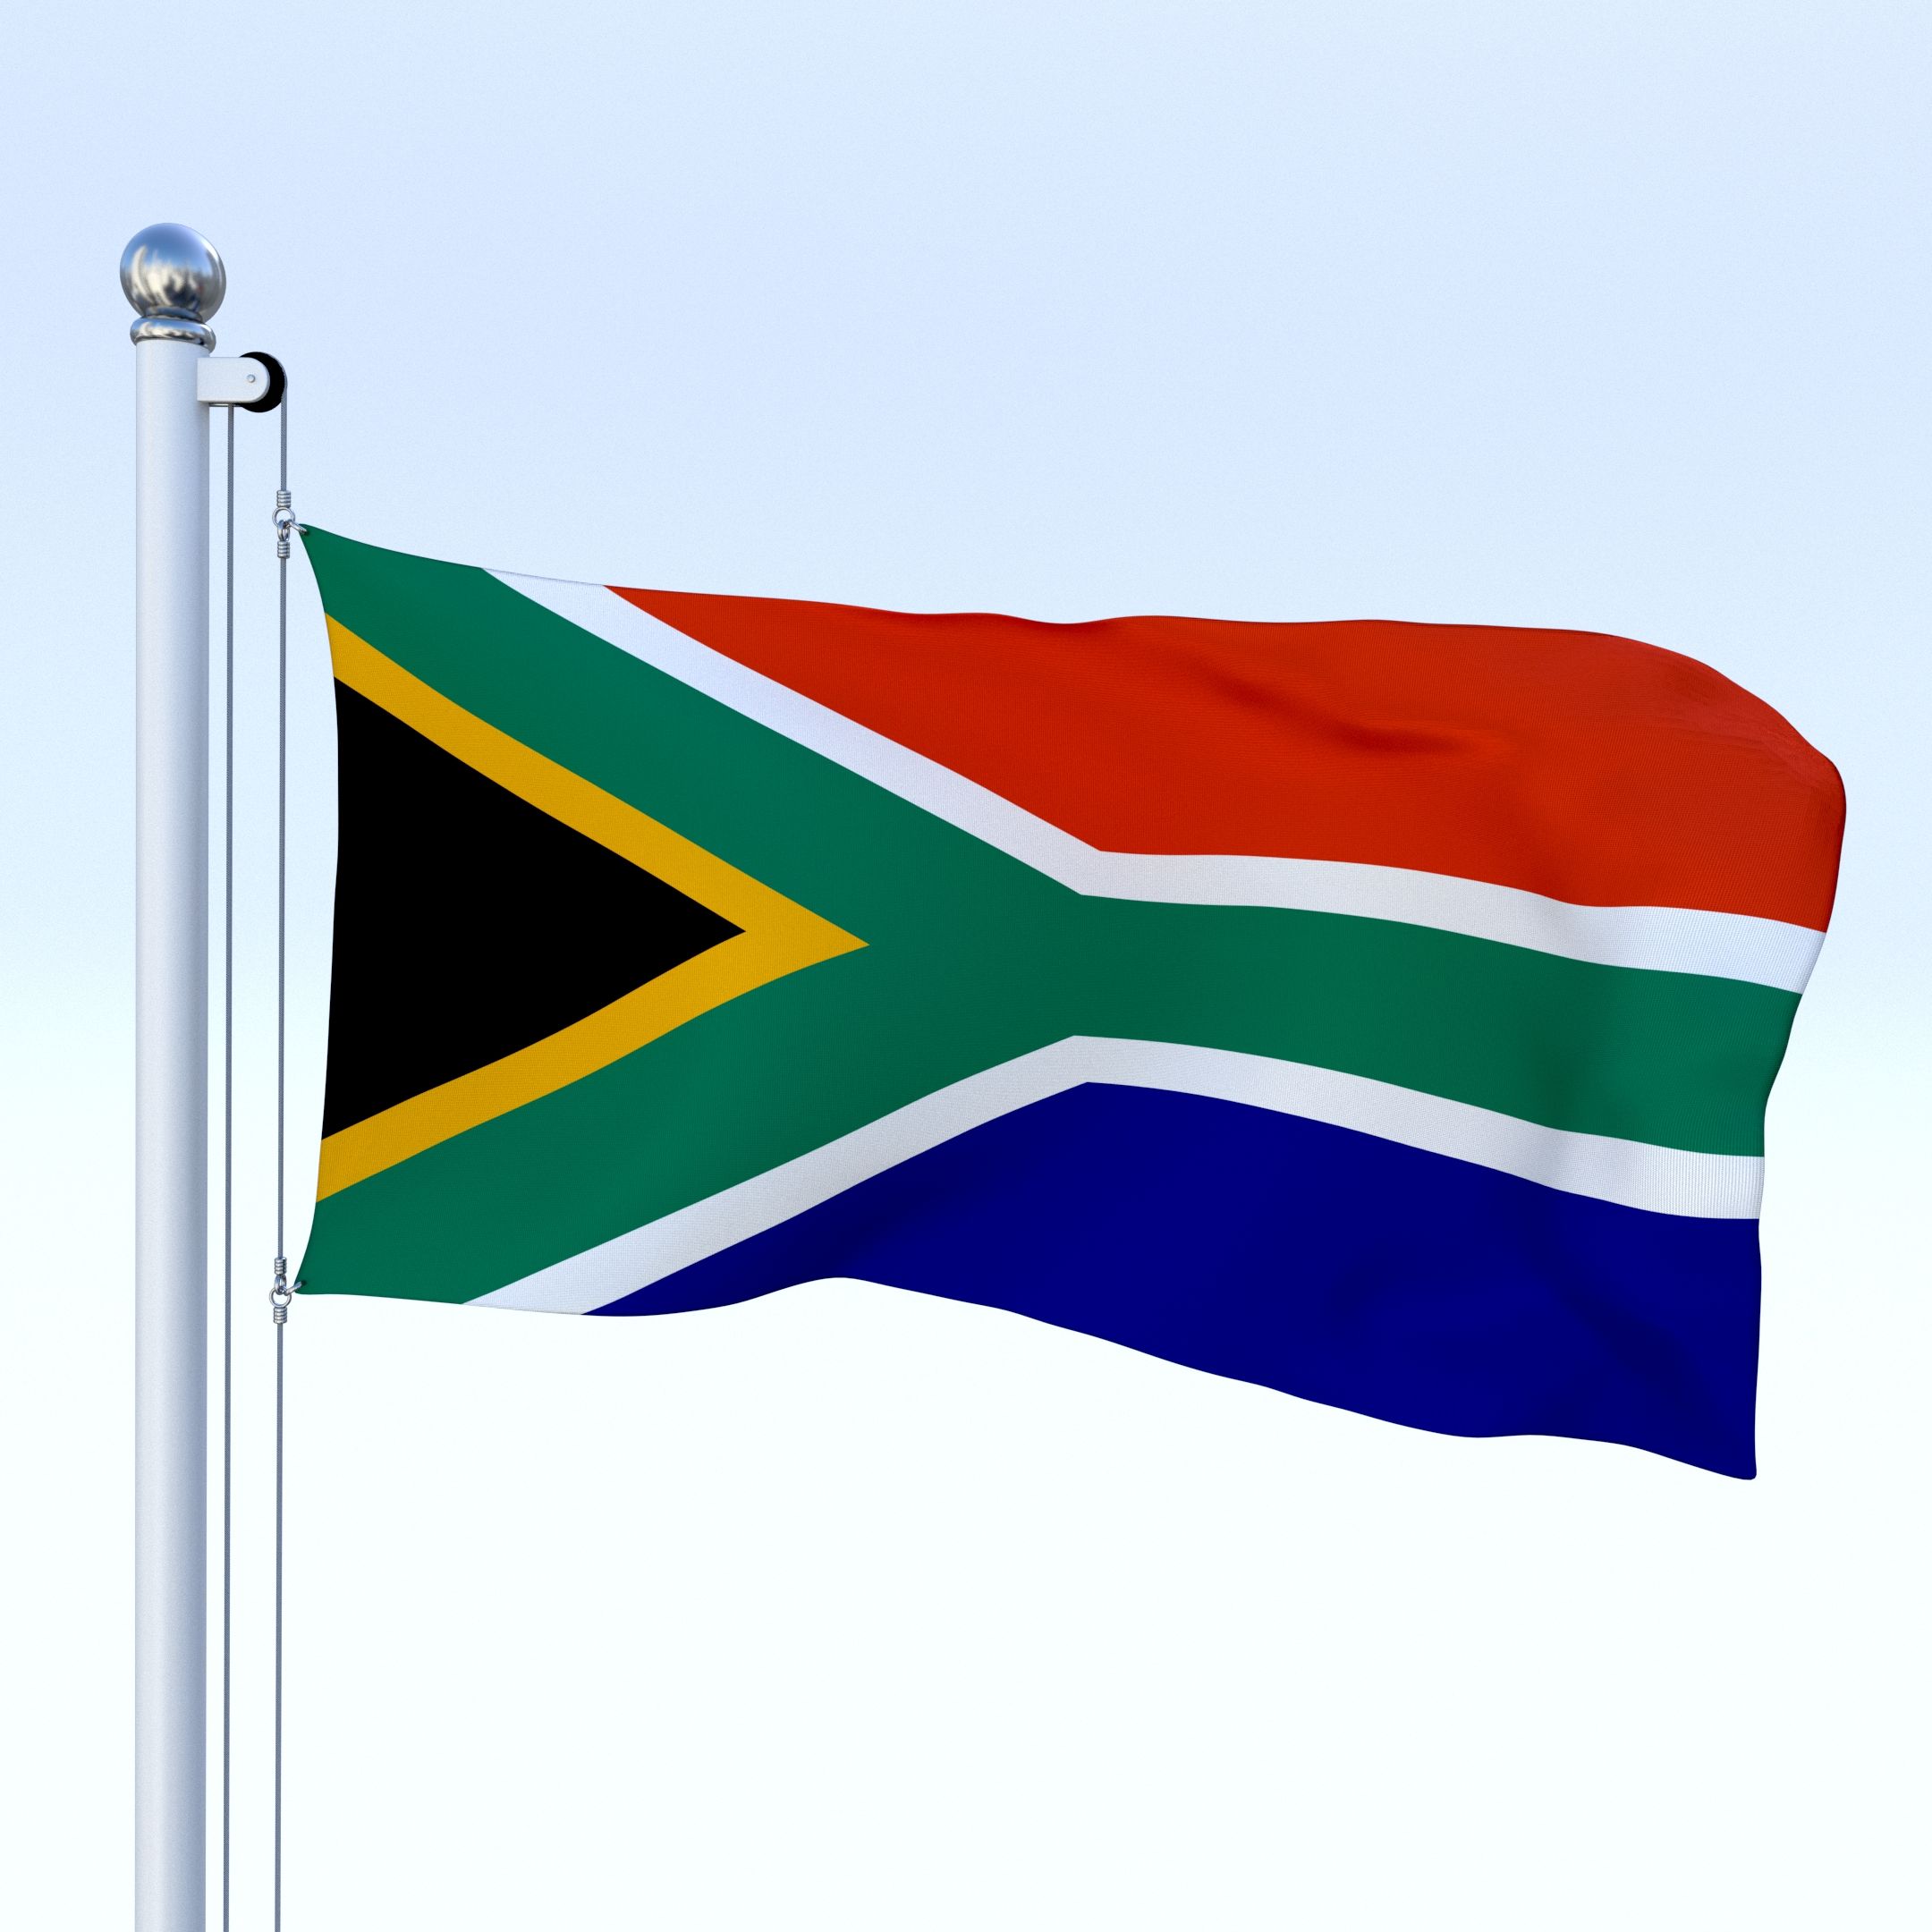 Animated South Africa Flag. Africa flag, South africa flag, South african flag